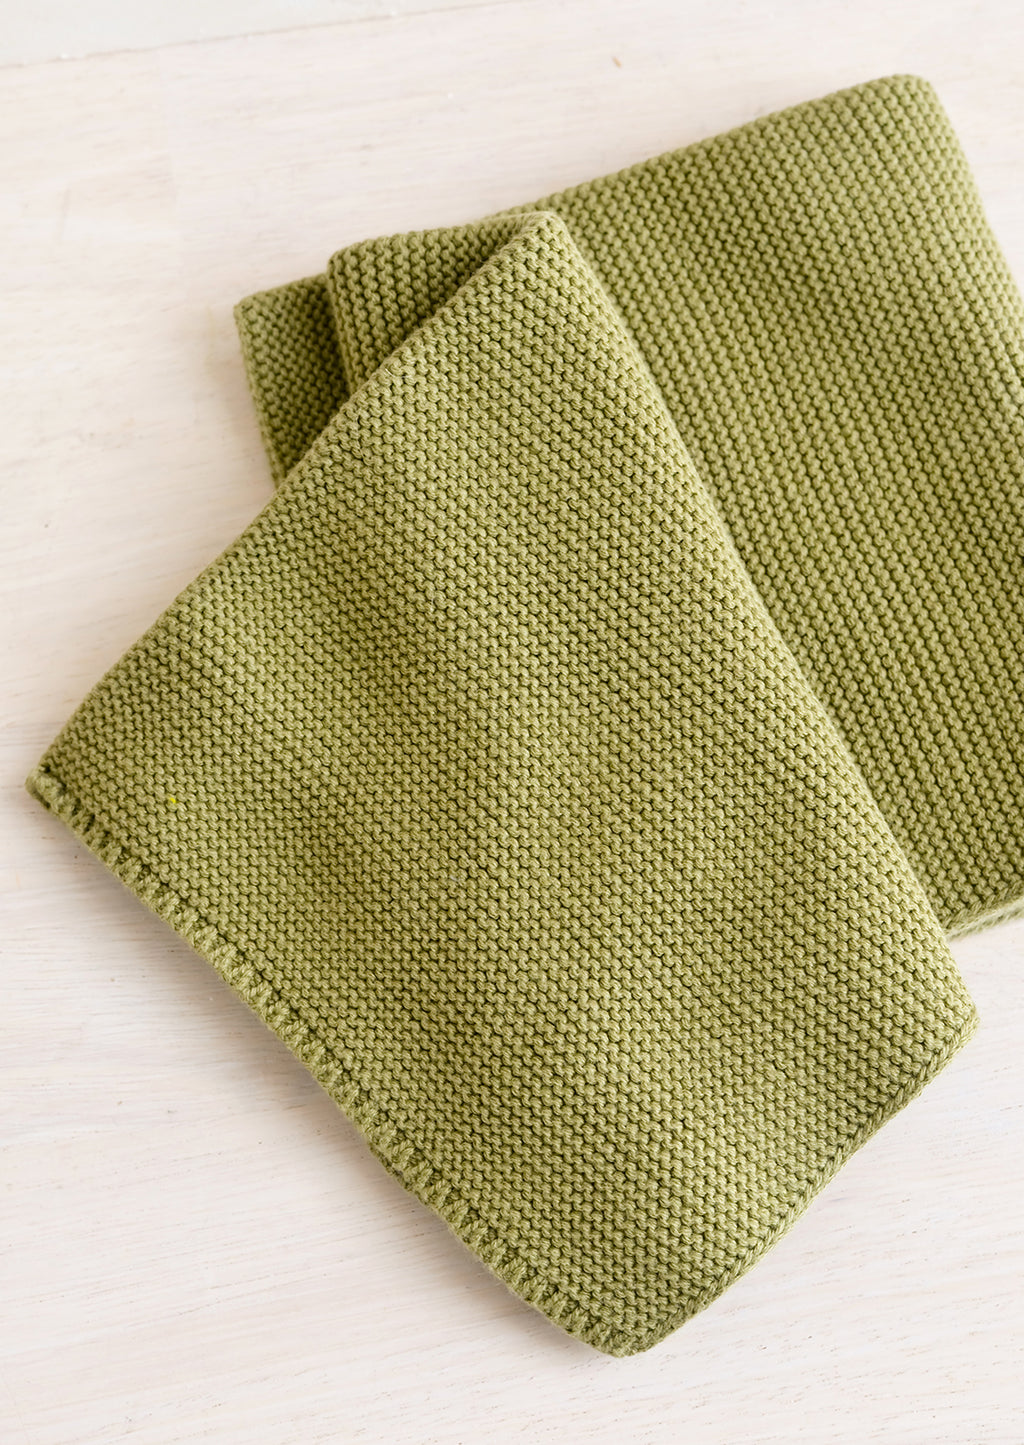 Olive: A knit cotton dish towel in olive green.